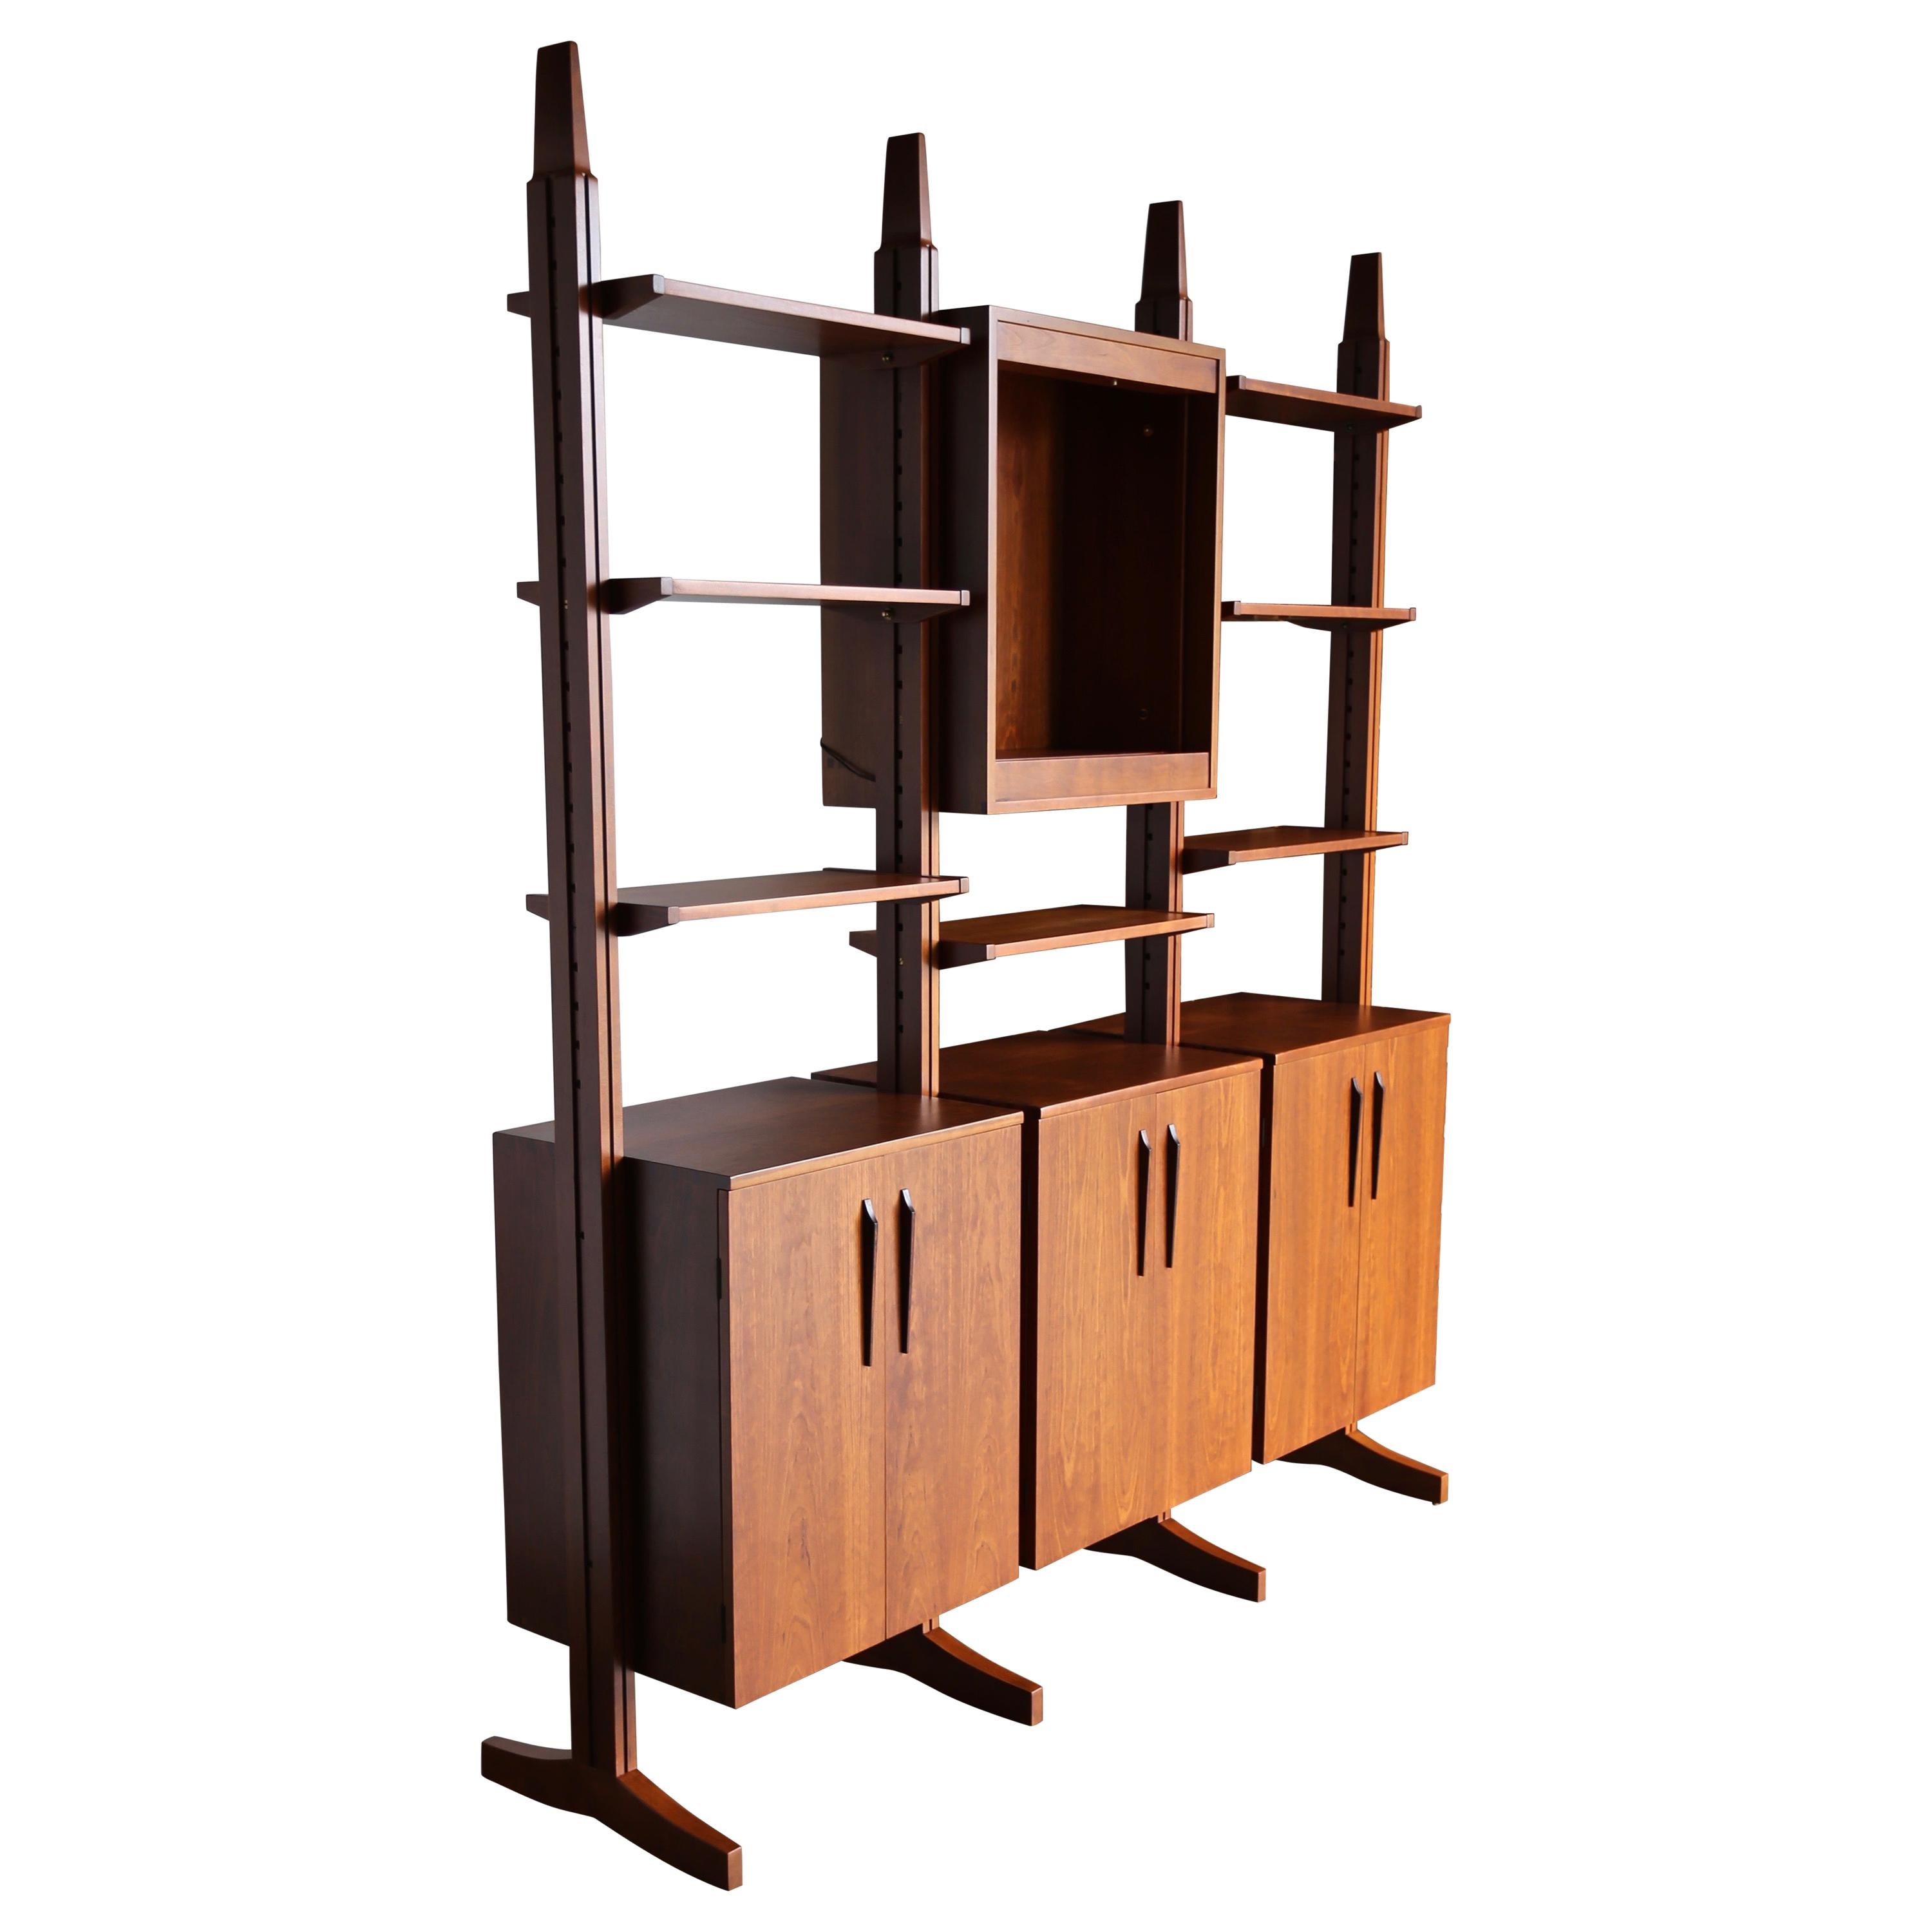 William Ketelle Handcrafted Freestanding Wall Unit, 1971